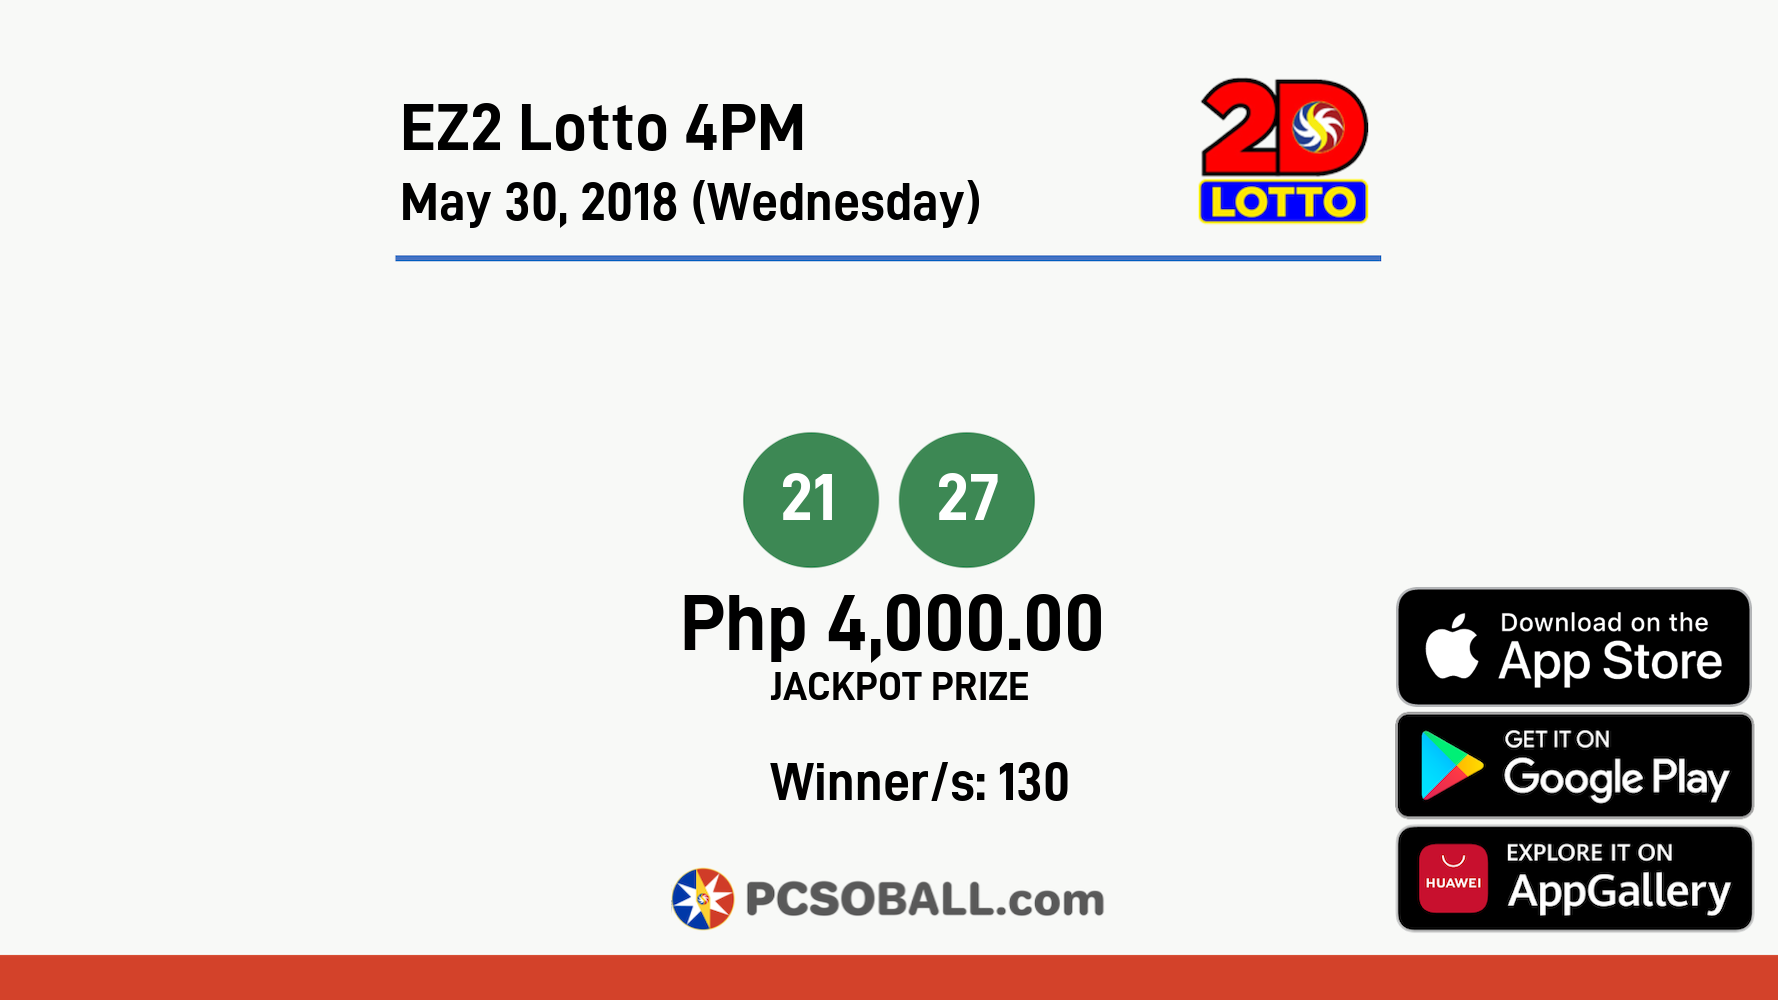 EZ2 Lotto 4PM May 30, 2018 (Wednesday) Result